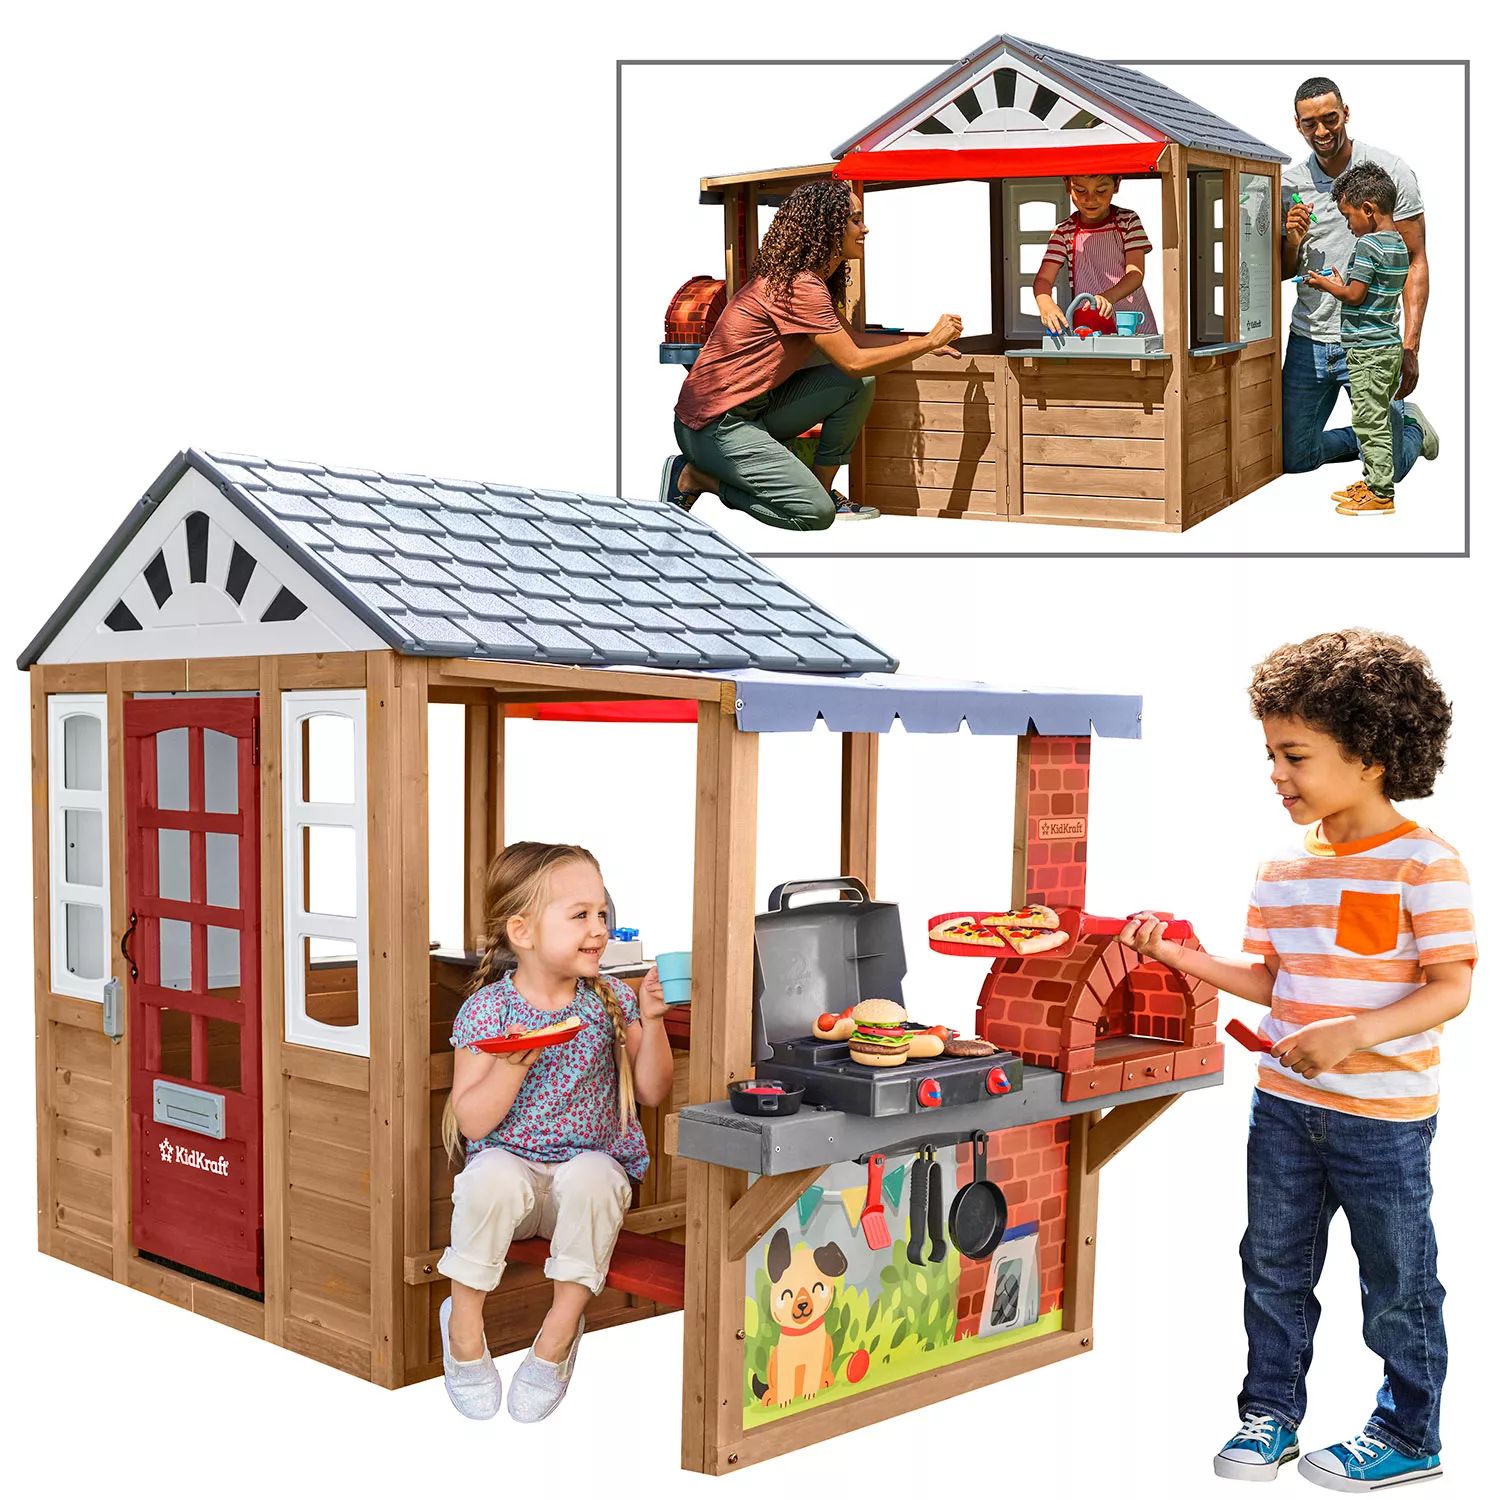 KidKraft Grill & Chill Pizza Party Wooden Outdoor Playhouse | Sam's Club